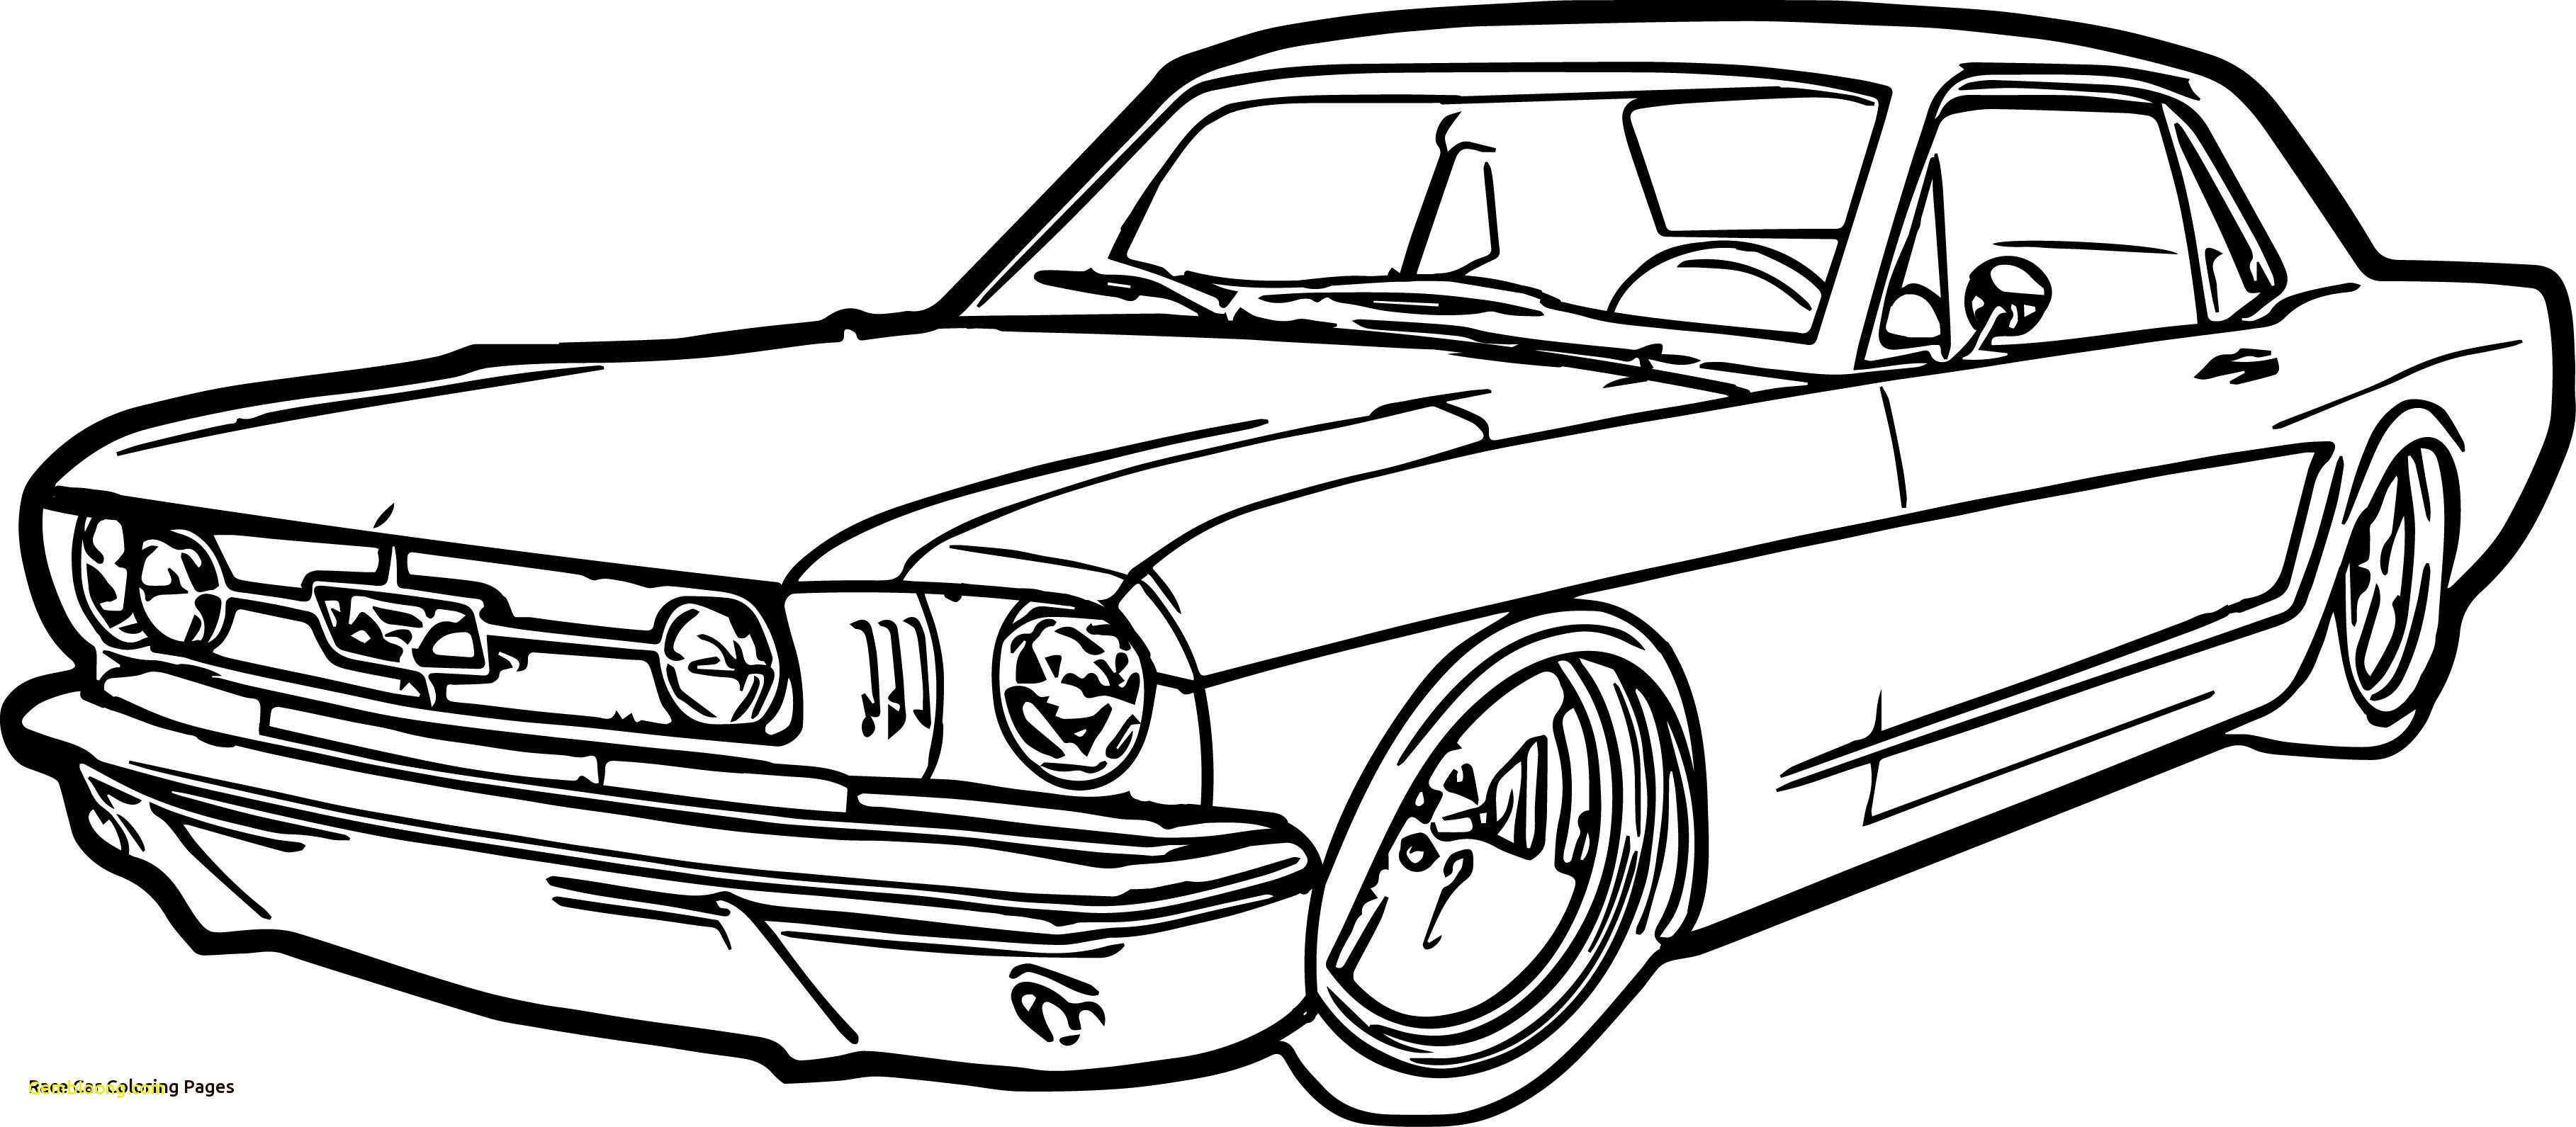 Coloring Page Of A Race Car Coloring Ideas Racing Coloring Pages Compromise Race Car